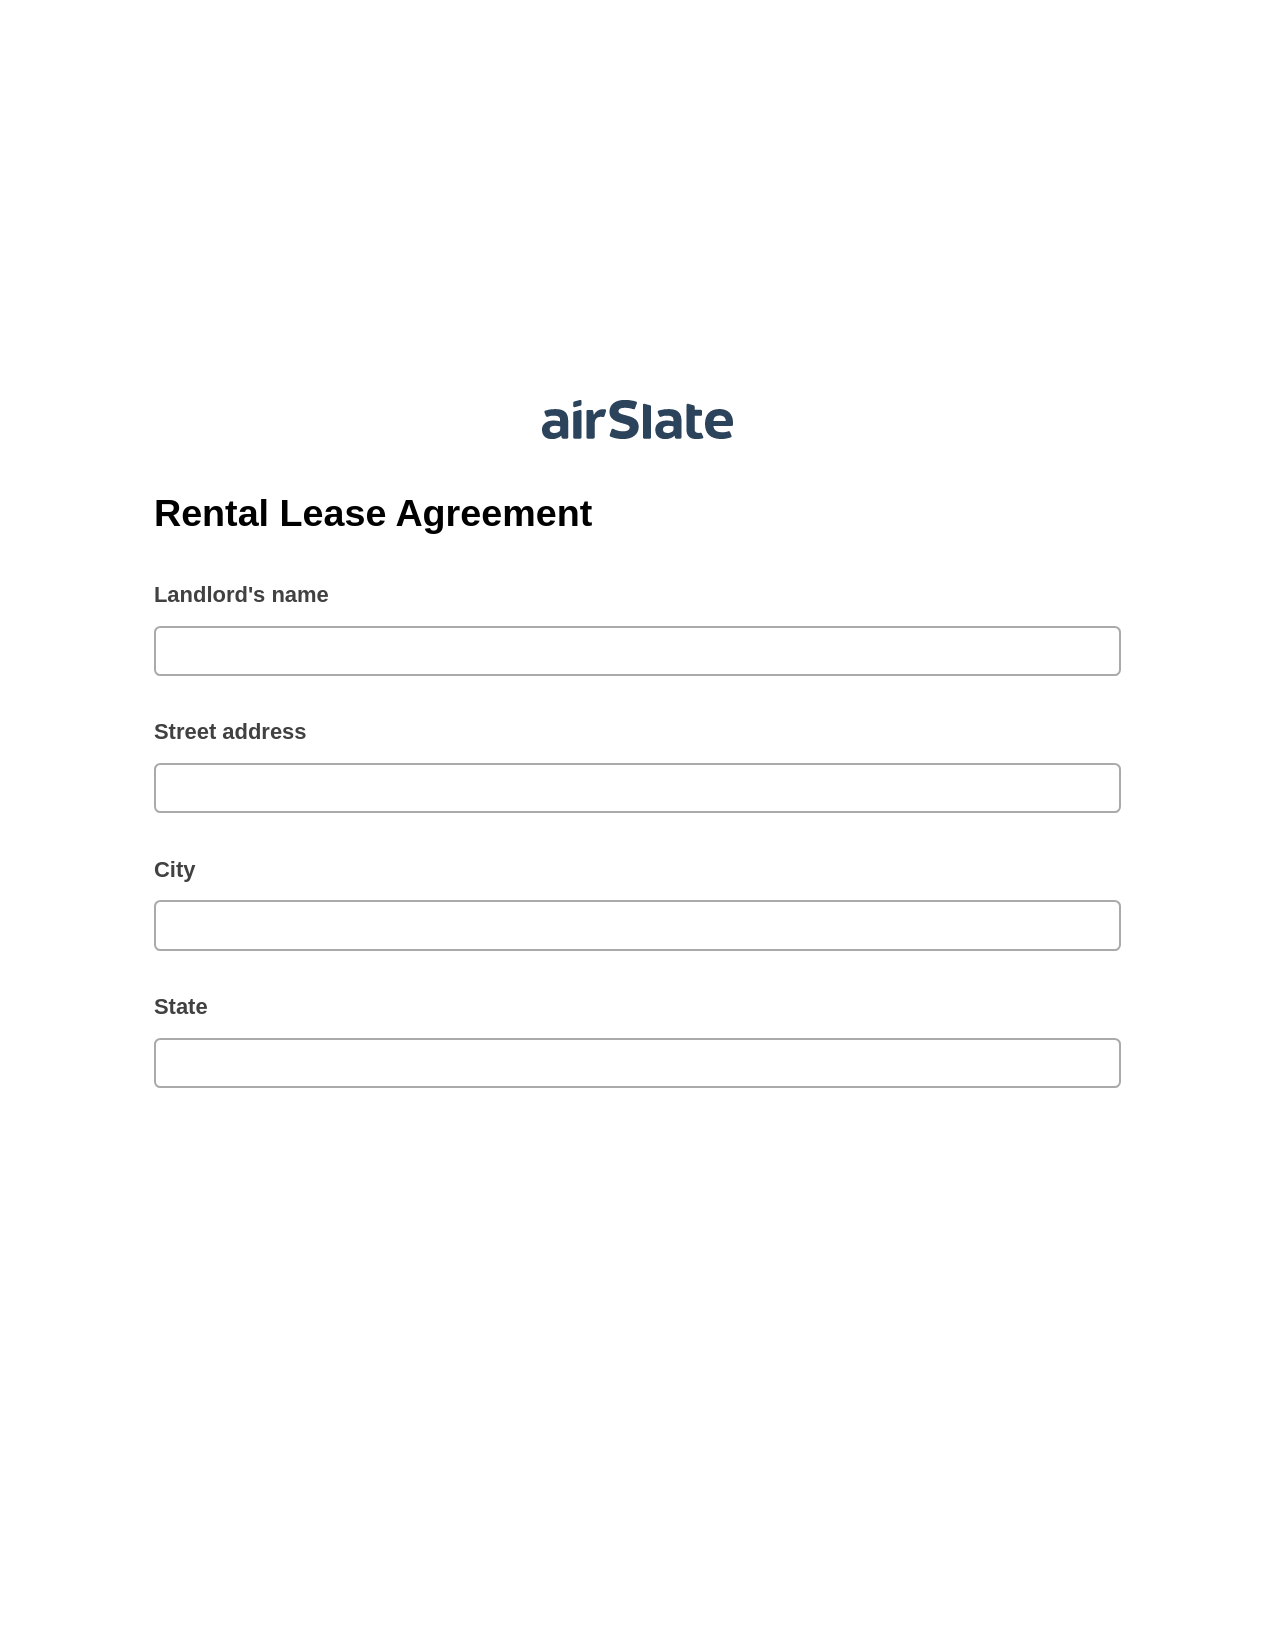 Rental Lease Agreement Pre-fill from Salesforce Record Bot, Send a Slate with Roles Bot, Export to Smartsheet